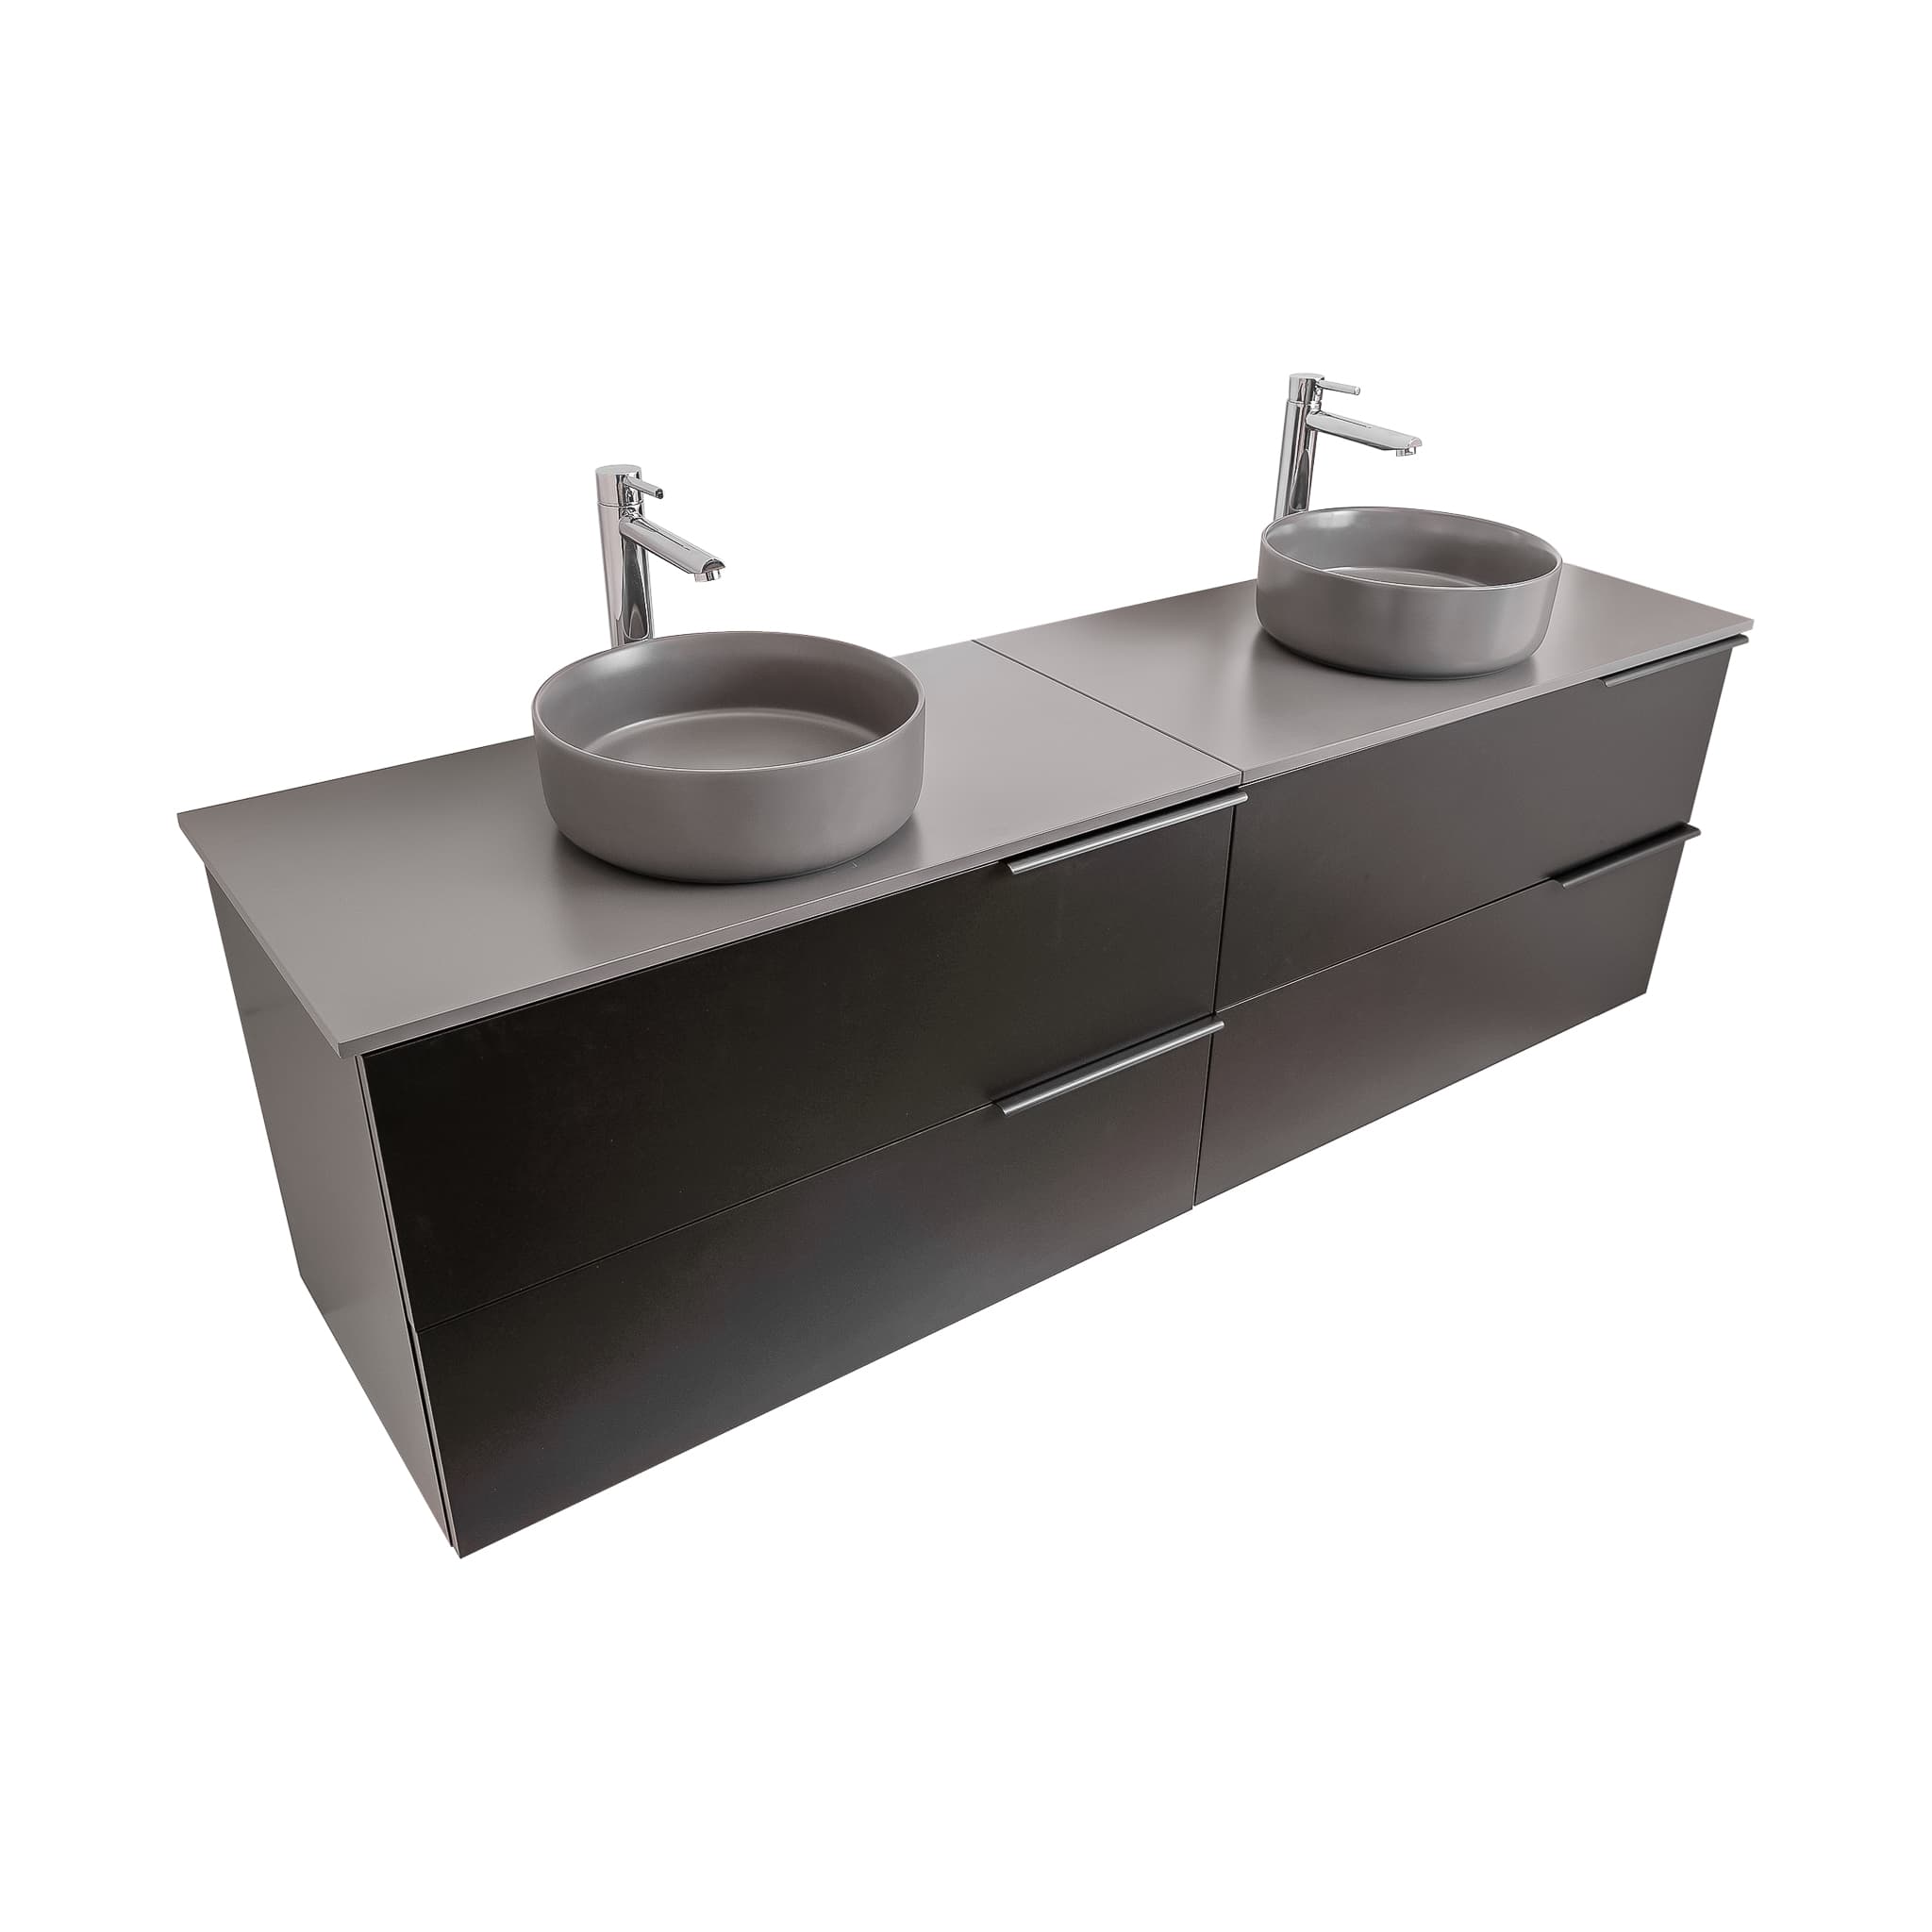 Mallorca 63 Matte Black Cabinet, Ares Grey Ceniza Top And Two Ares Grey Ceniza Ceramic Basin, Wall Mounted Modern Vanity Set